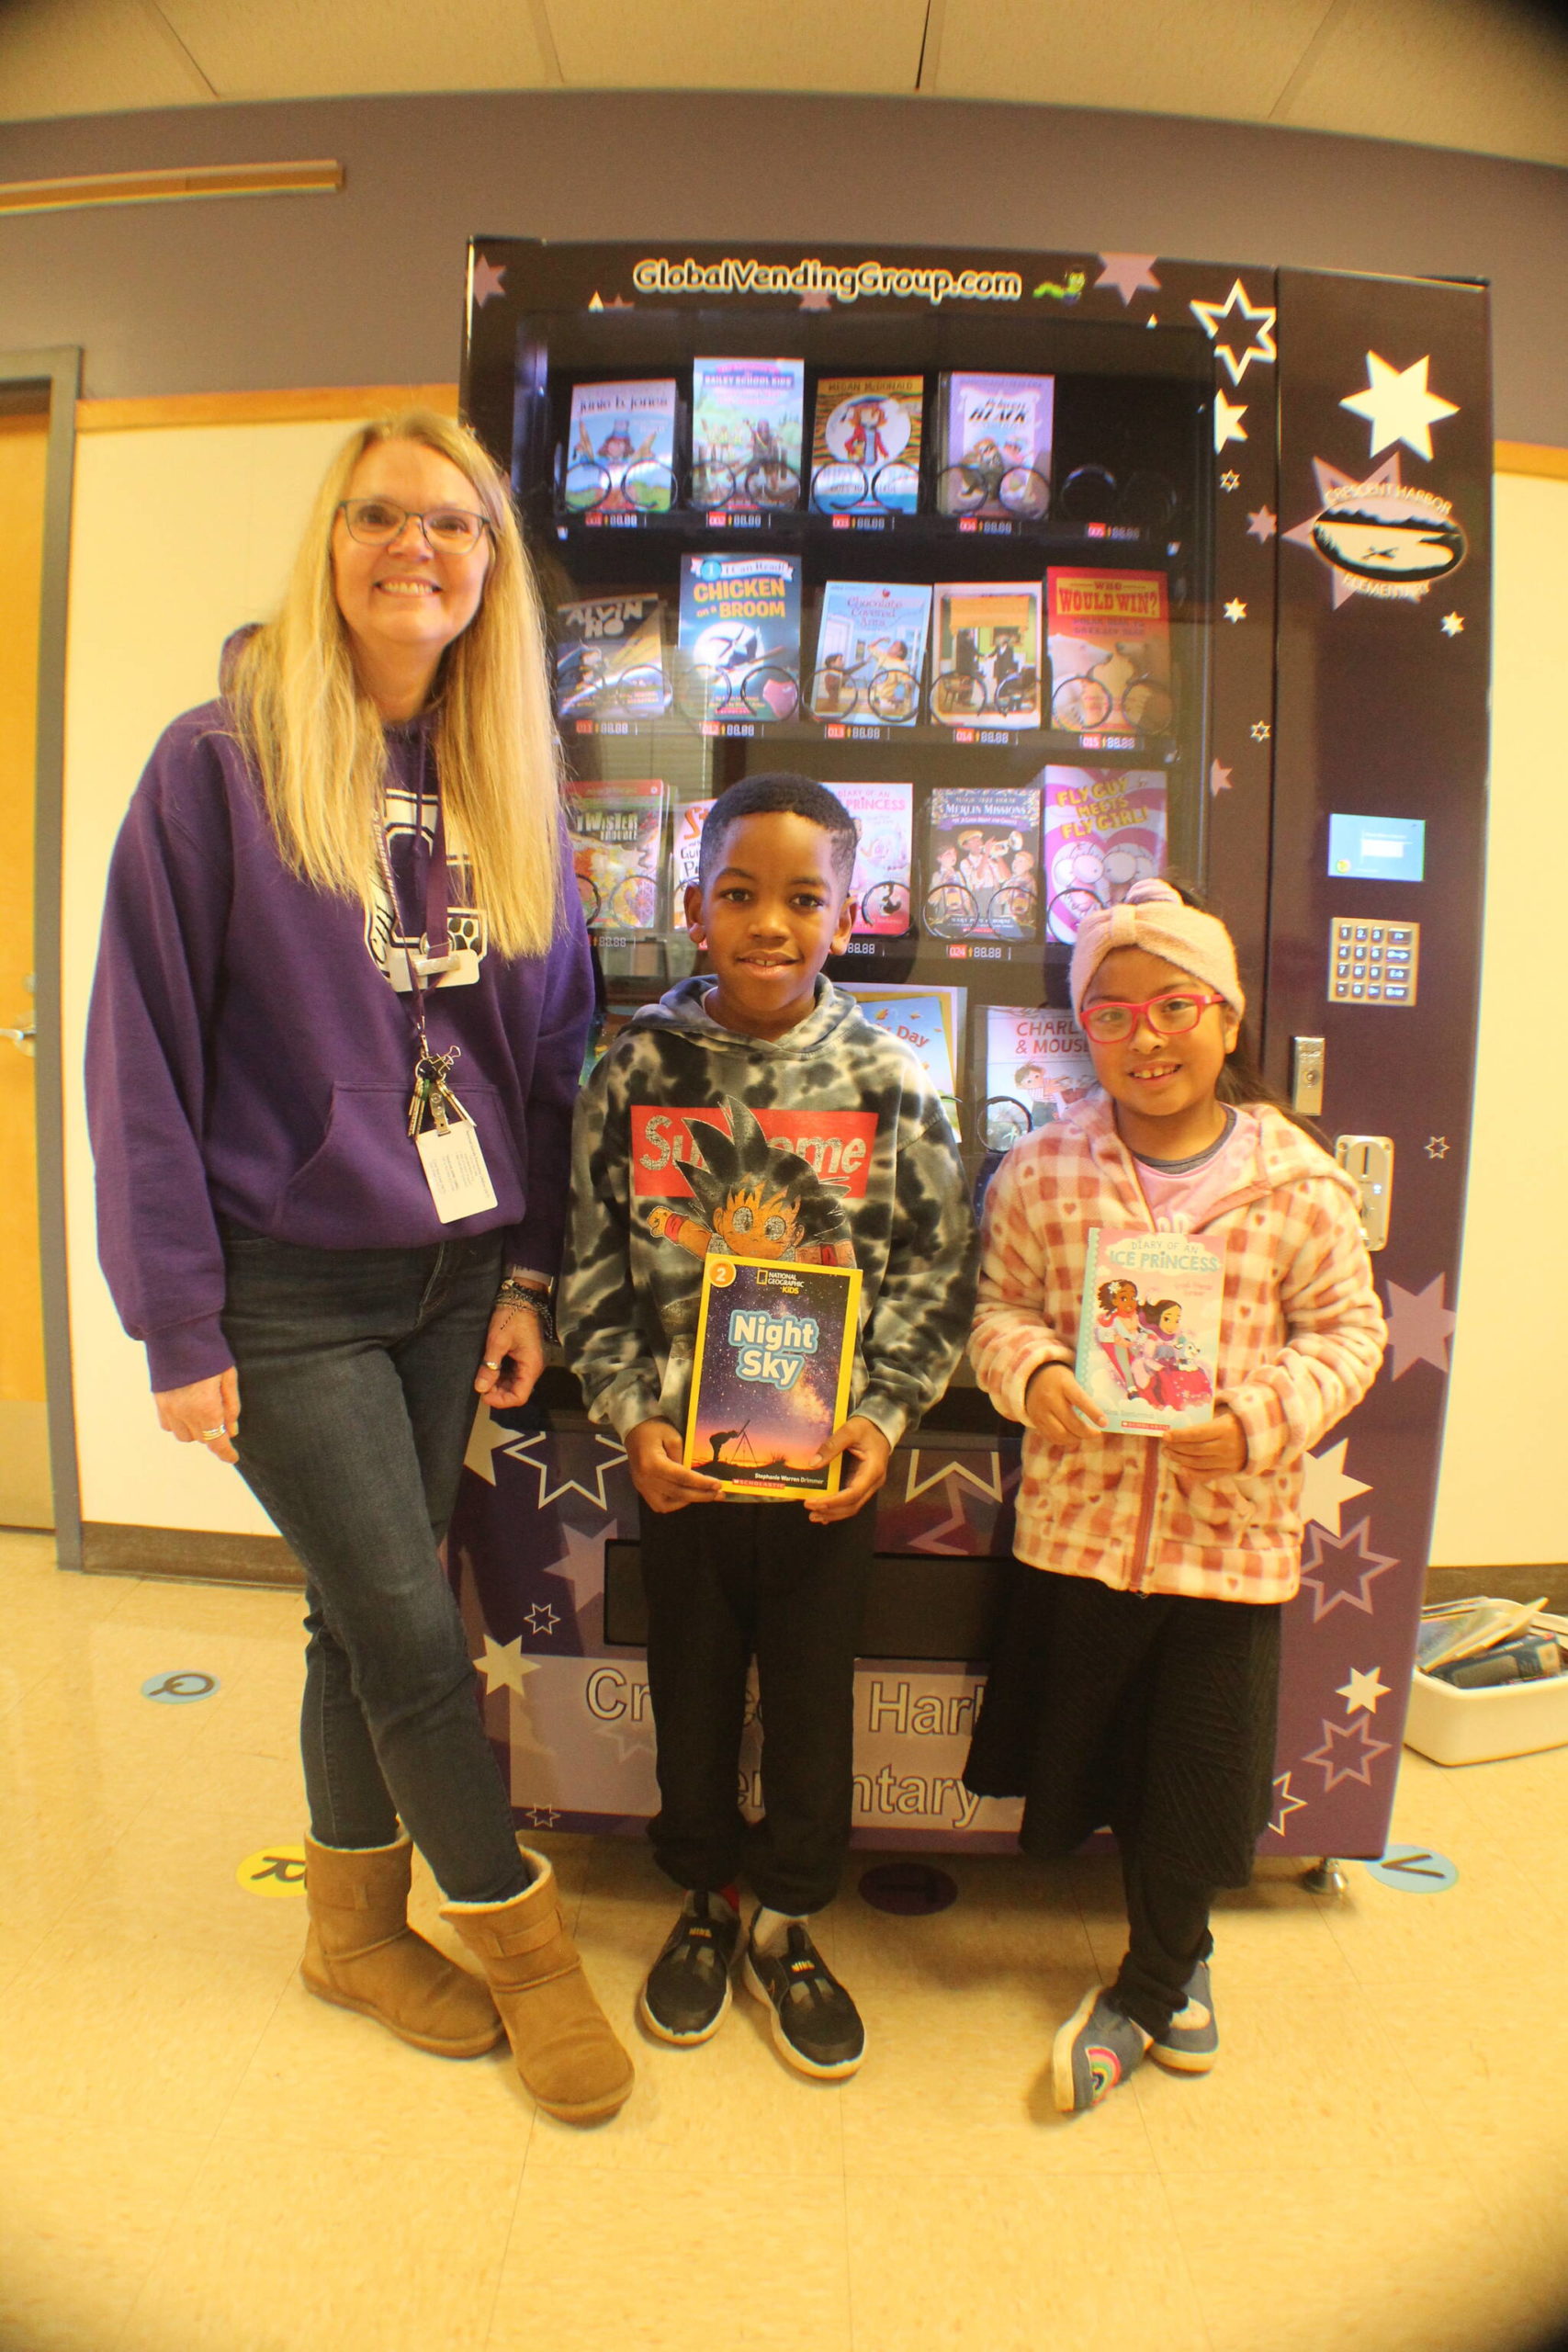 Photo by Karina Andrew/Whidbey News-Times
From left, Glenda Jackson, Trenton Miller and Cristal Hernandez Cruz enjoy the book vending machine, new to Crescent Harbor Elementary School this school year.